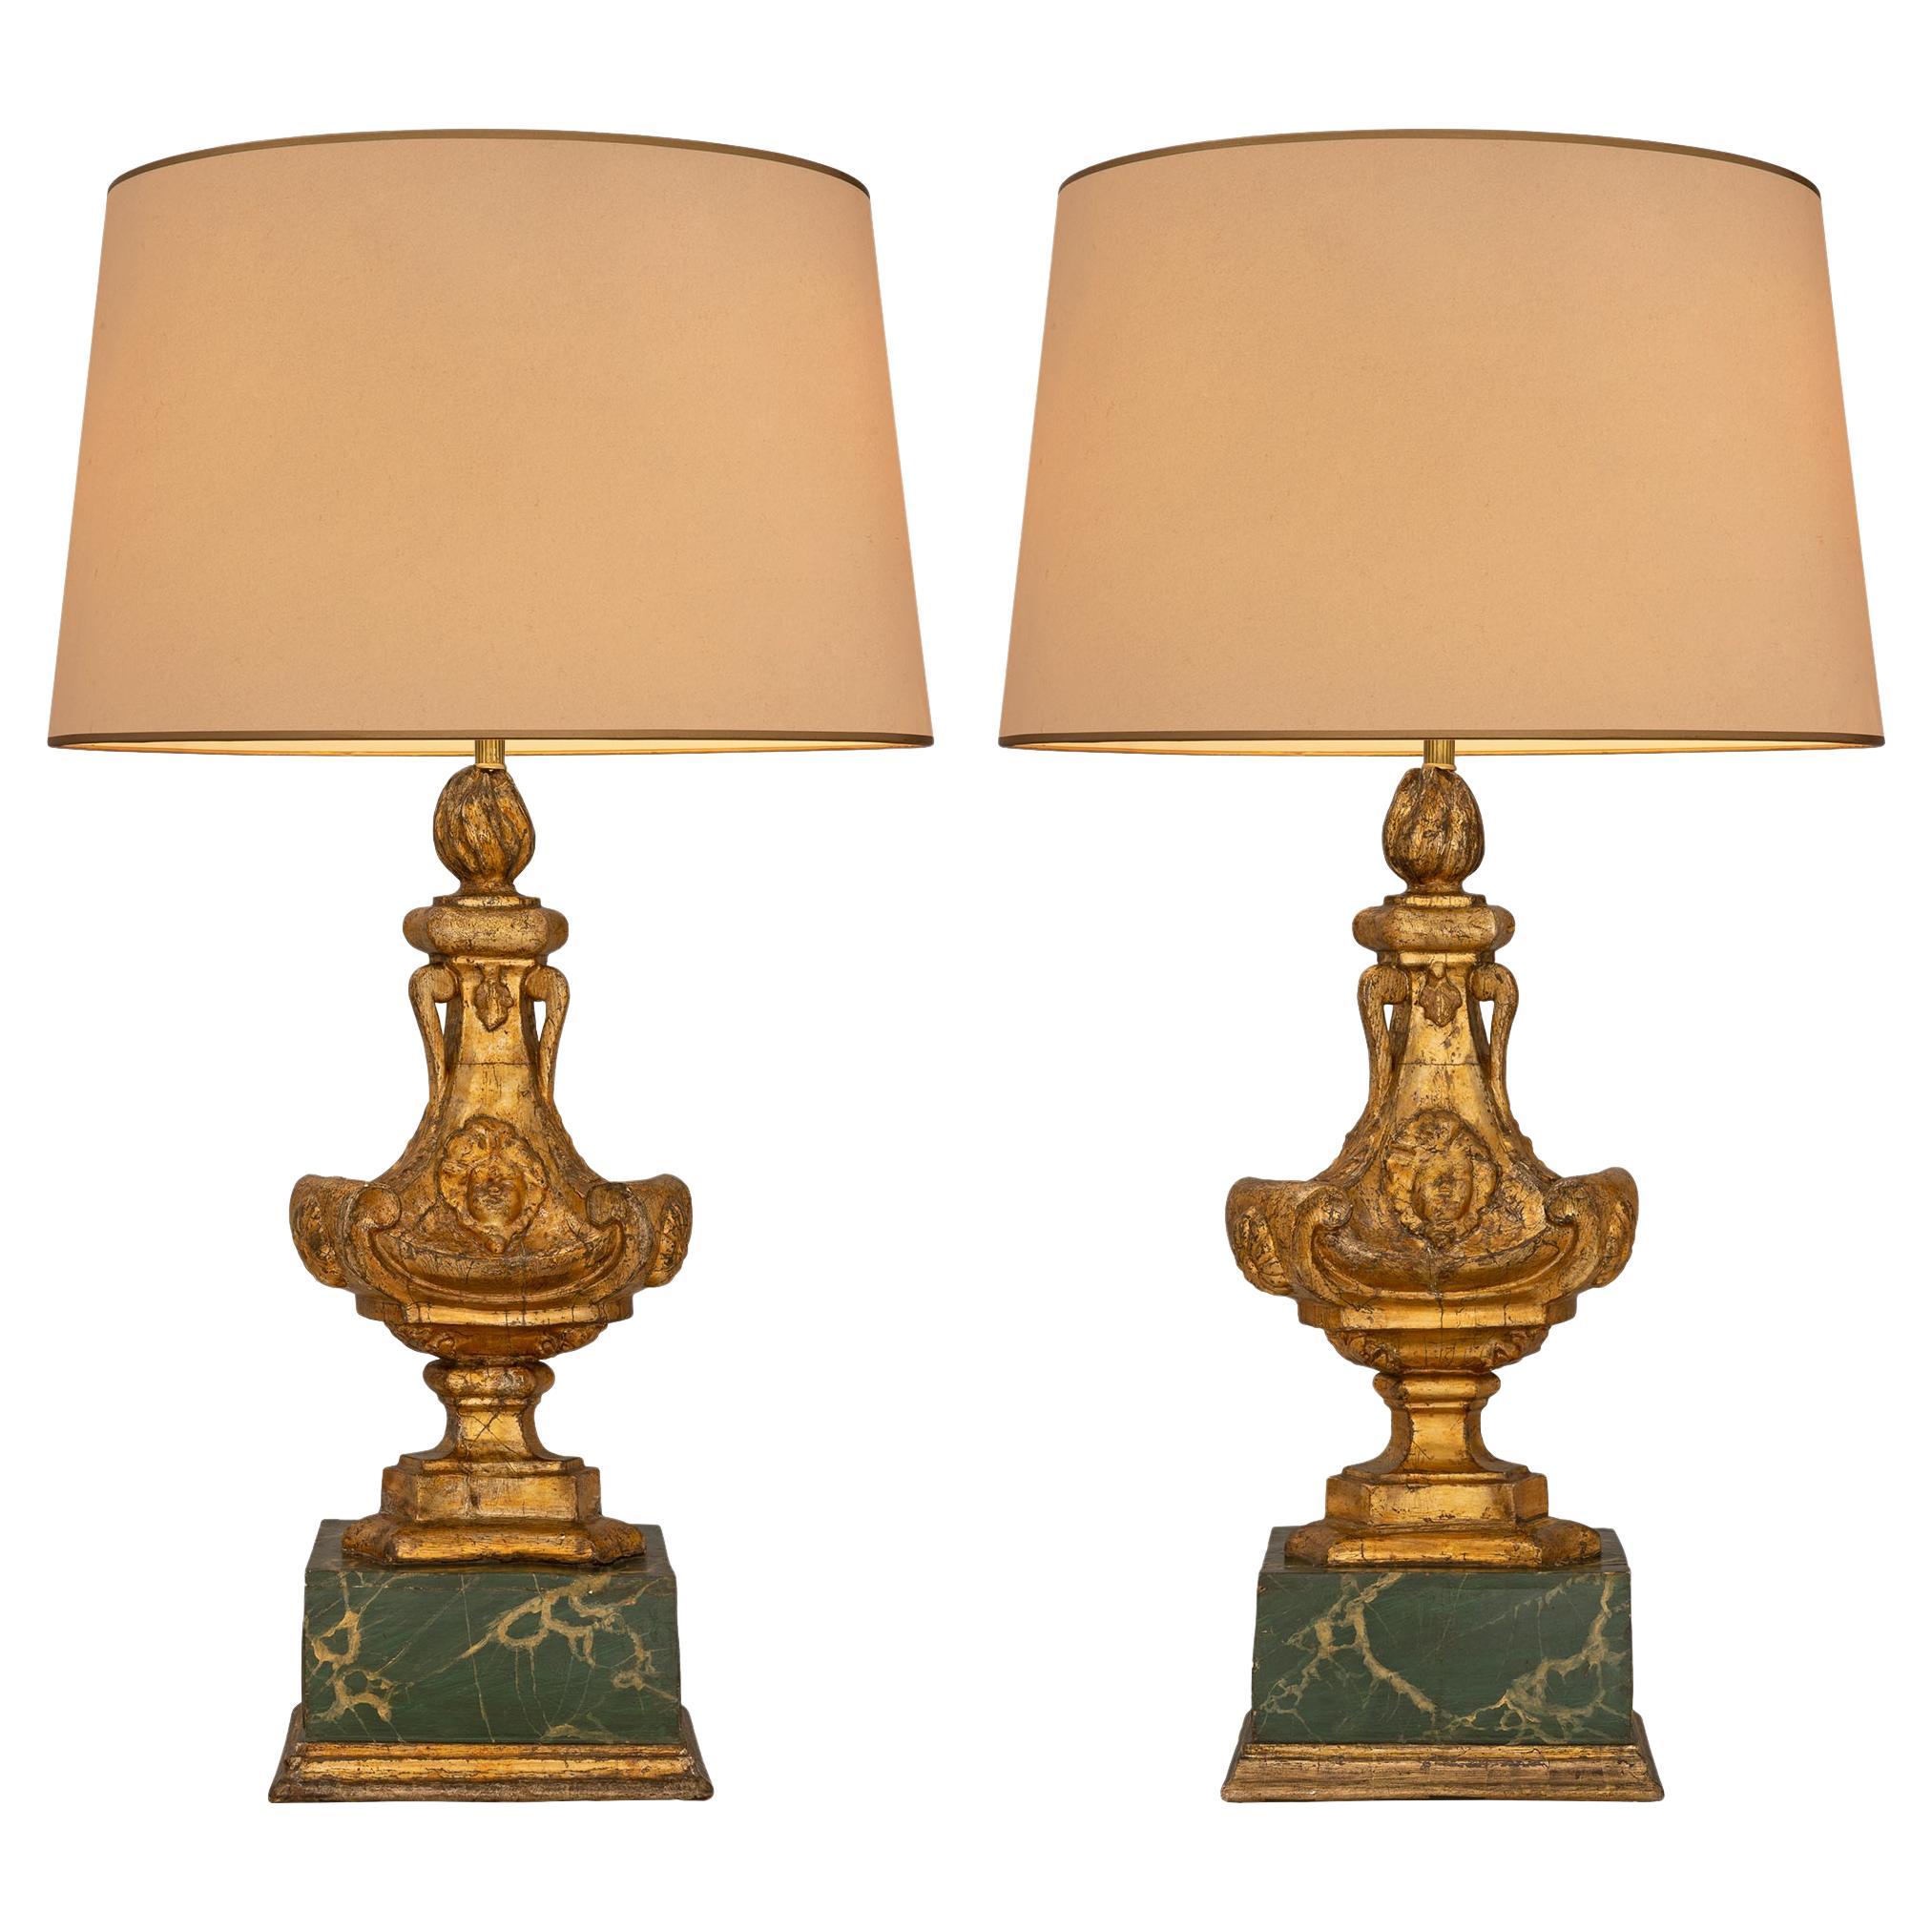 Pair of Italian 18th Century Louis XVI Period Carved Mecca Lamps For Sale